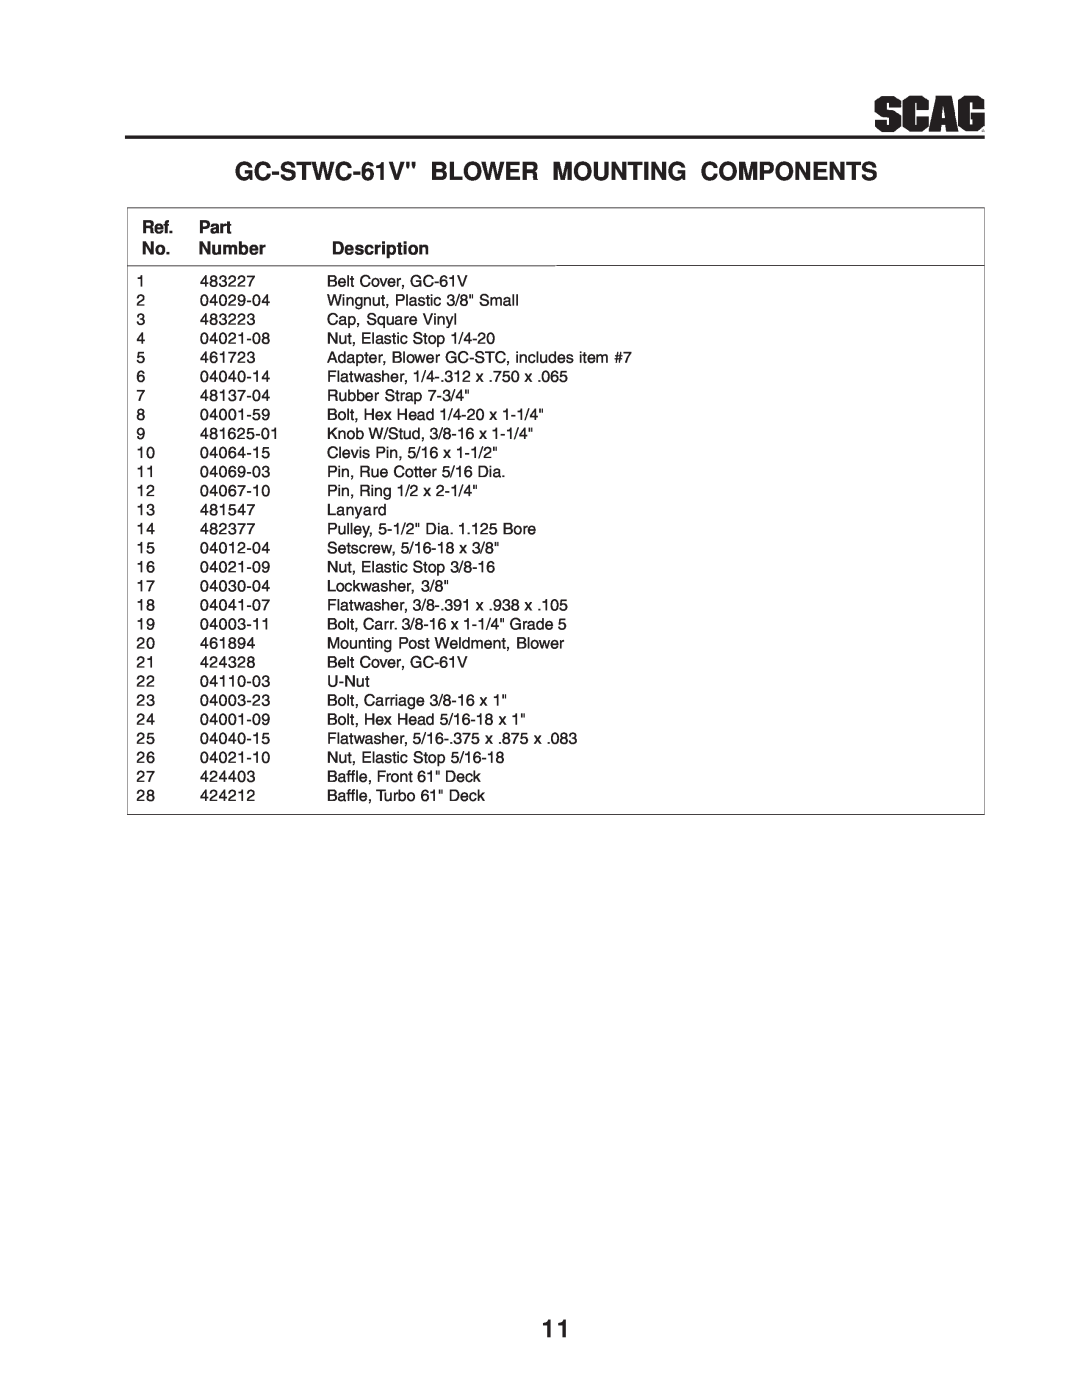 Scag Power Equipment GC-STWC-61V BLOWER MOUNTING COMPONENTS, Part, Number, Description, Pulley, 5-1/2 Dia. 1.125 Bore 